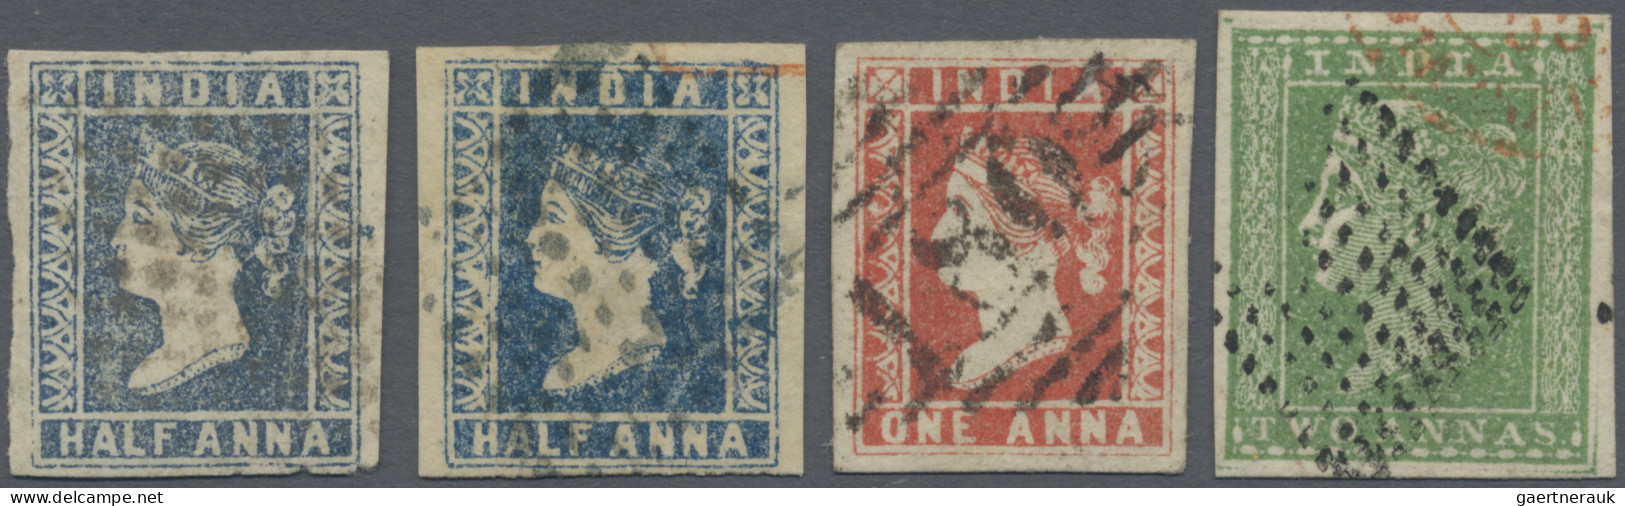 India: 1854 Lithographed ½a. Blue (two Singles) And 1a. Red Plus 2a. Green, All - 1854 Compagnia Inglese Delle Indie